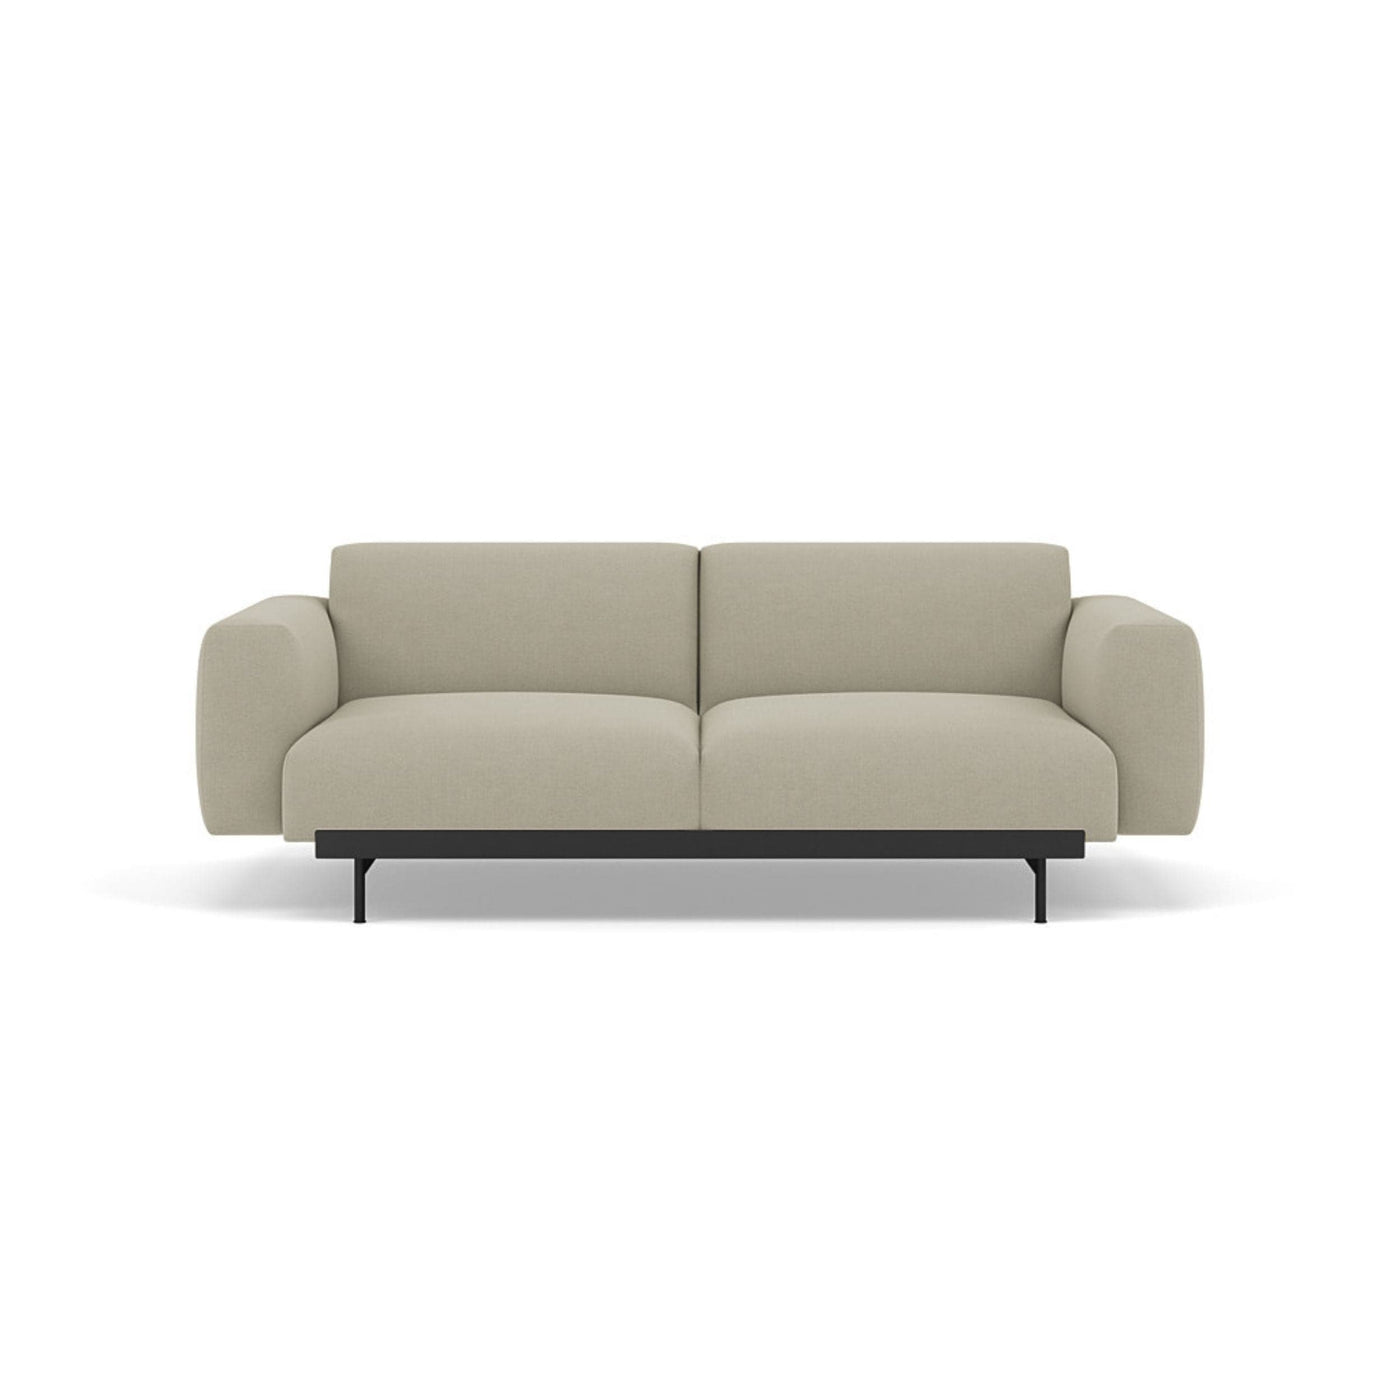 Muuto In Situ Modular 2 Seater Sofa, configuration 1. Made to order from someday designs #colour_fiord-322